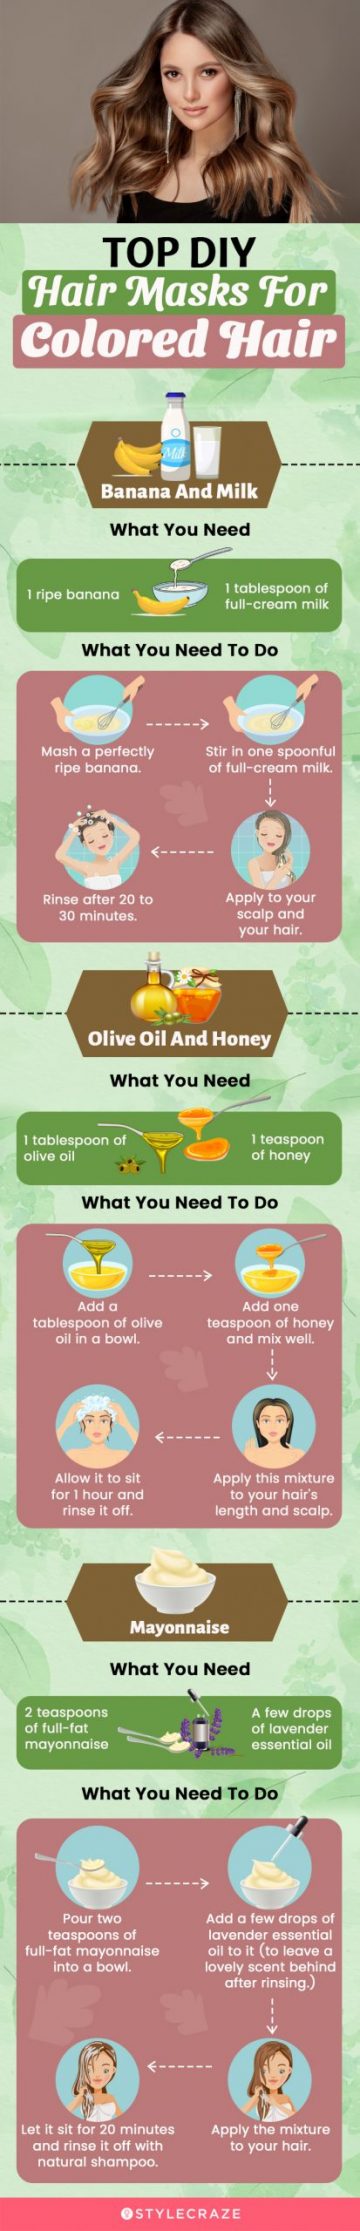 top diy hair masks for colored hair (infographic)